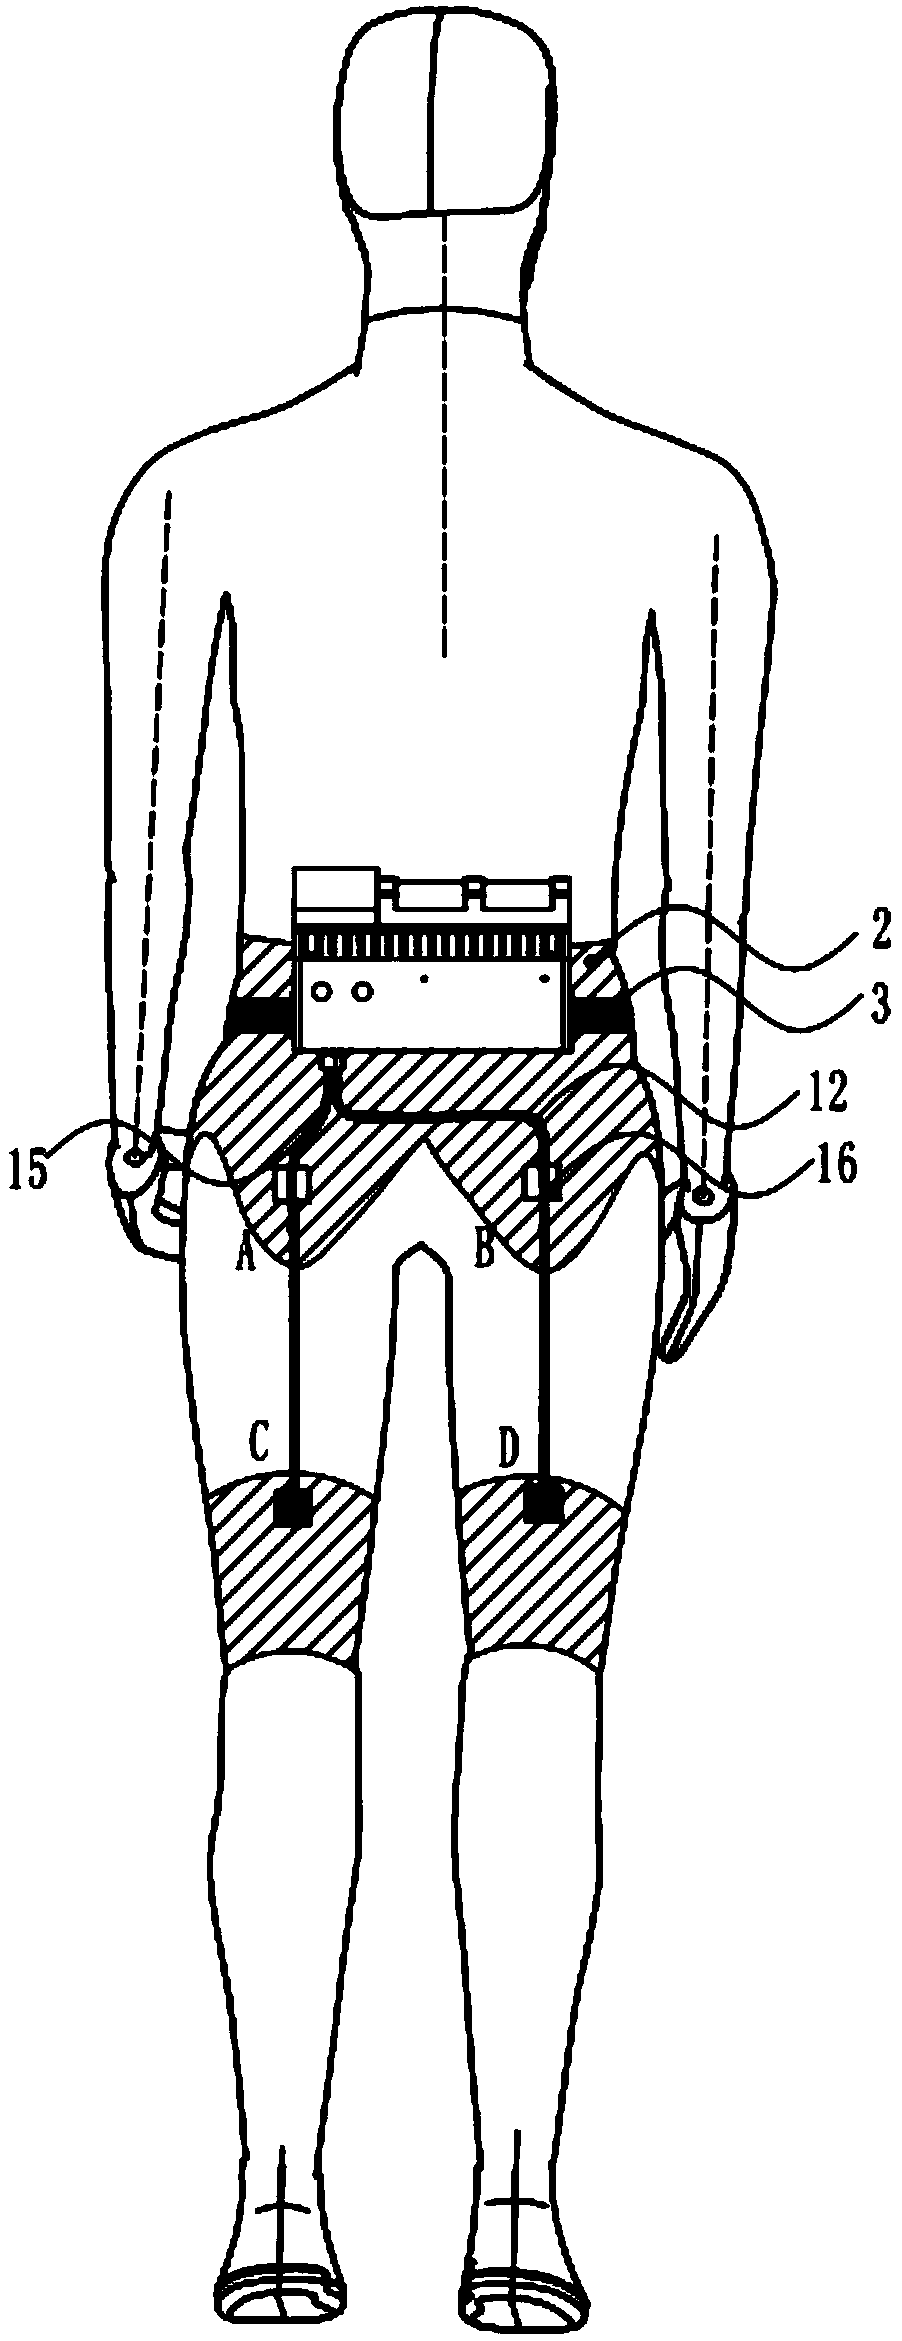 Single-joint double-sided driving device for flexible assisted outer garment